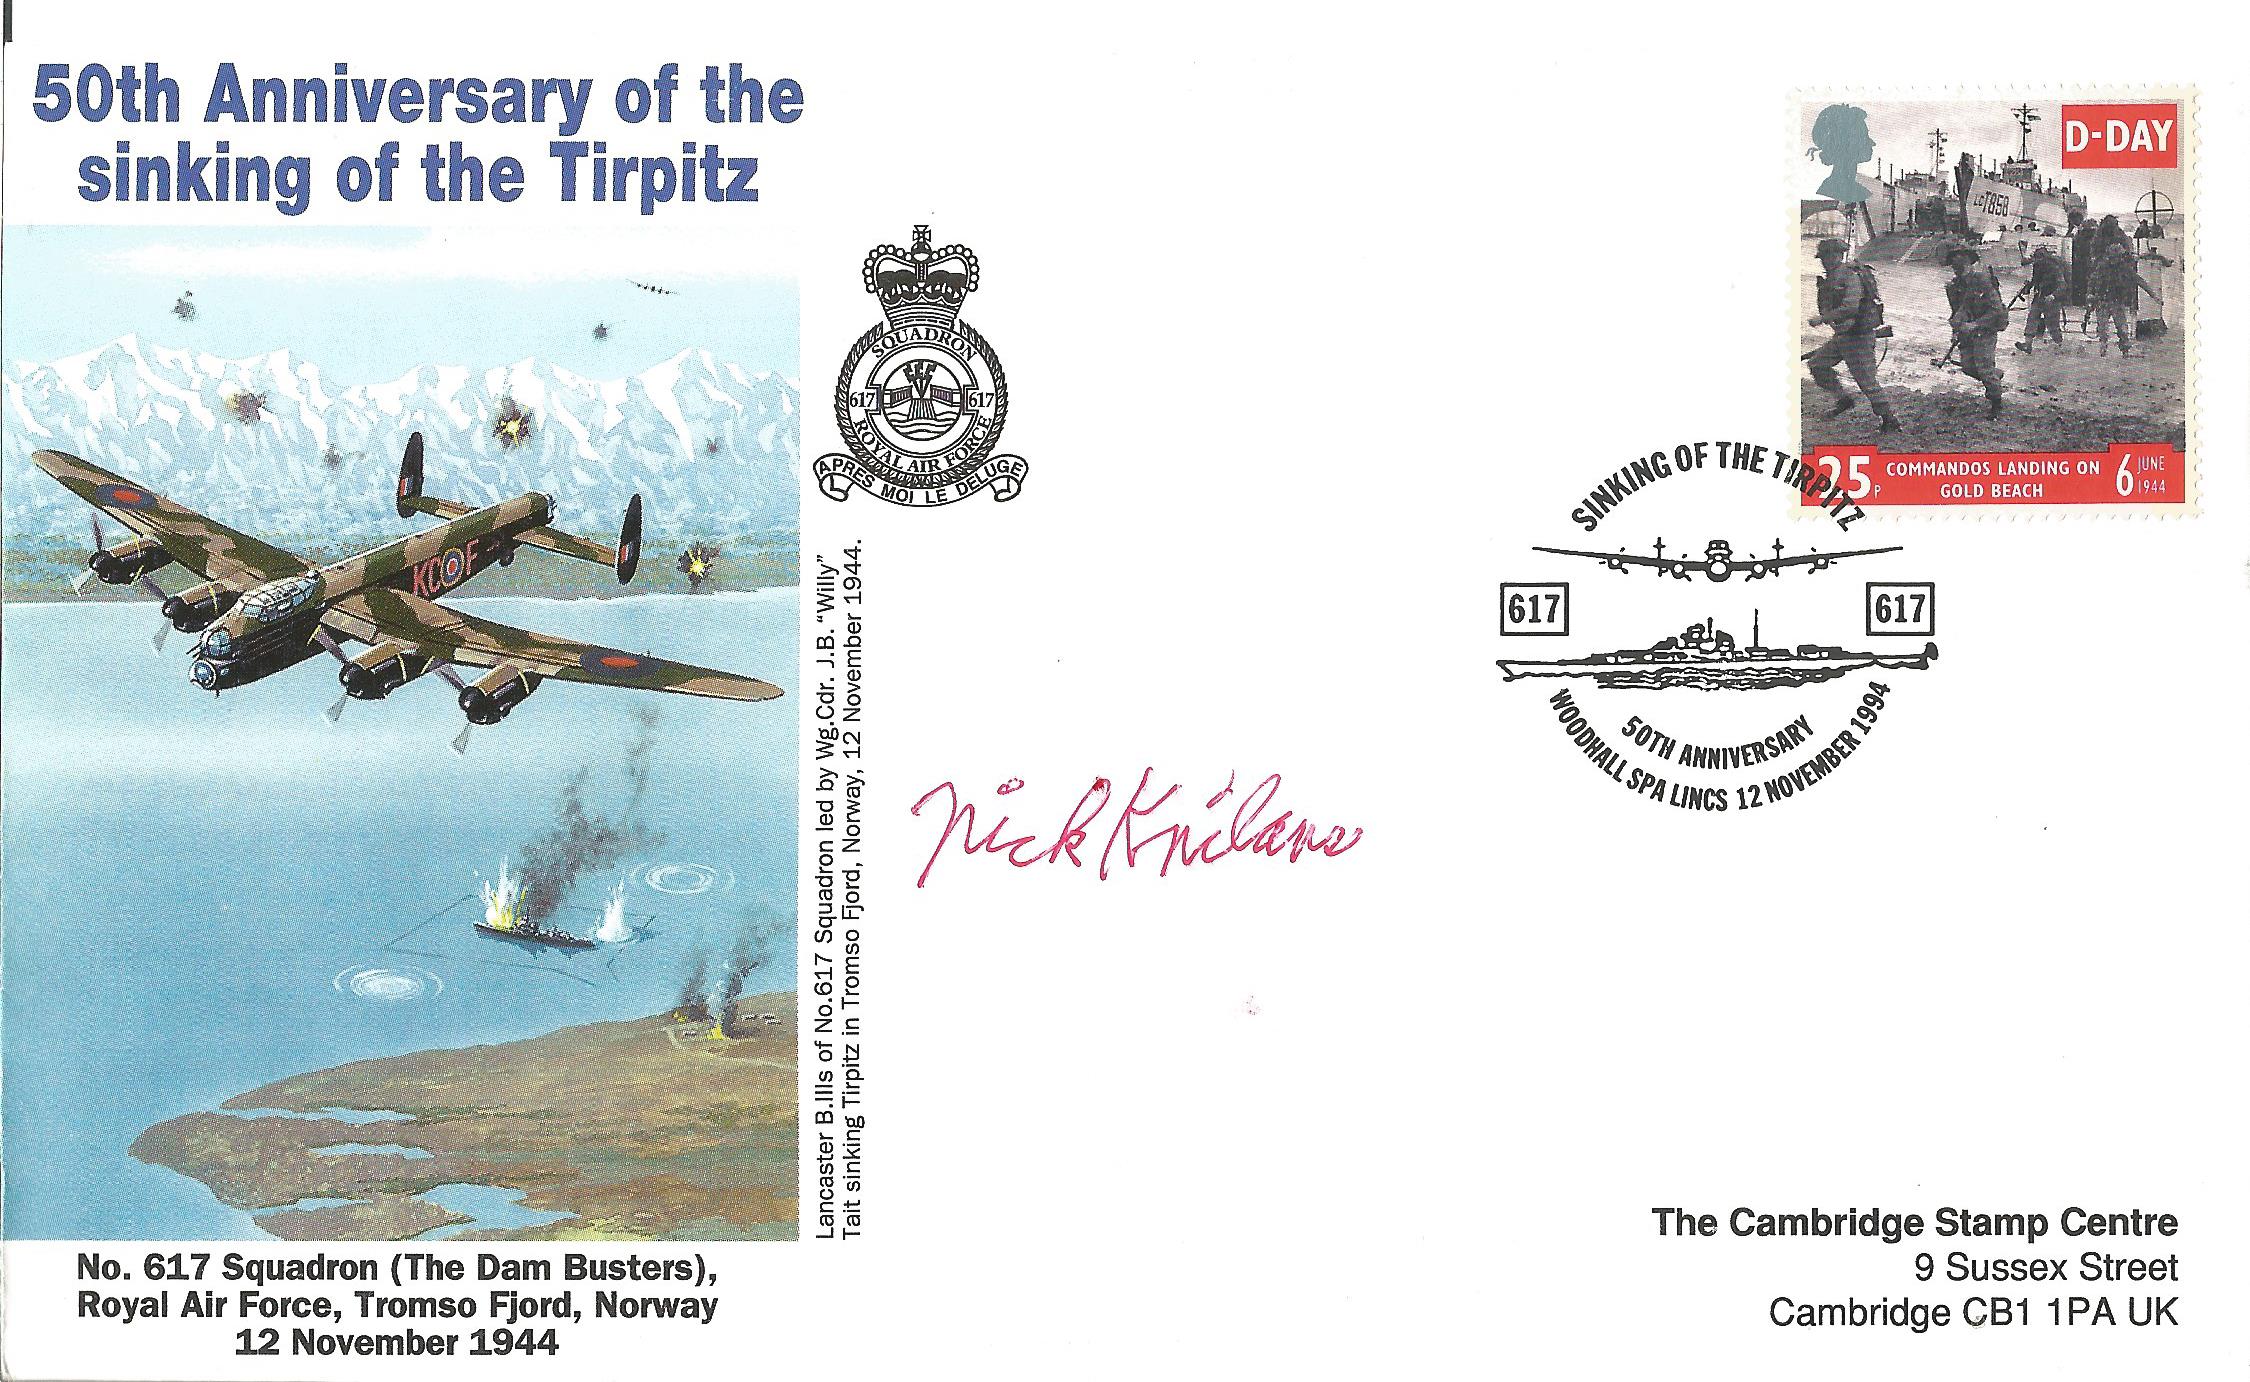 Major H. C. Nick Knilans DSO, DFC Pilot, Tirpitz Raid signed 50th Anniversary of the Sinking of